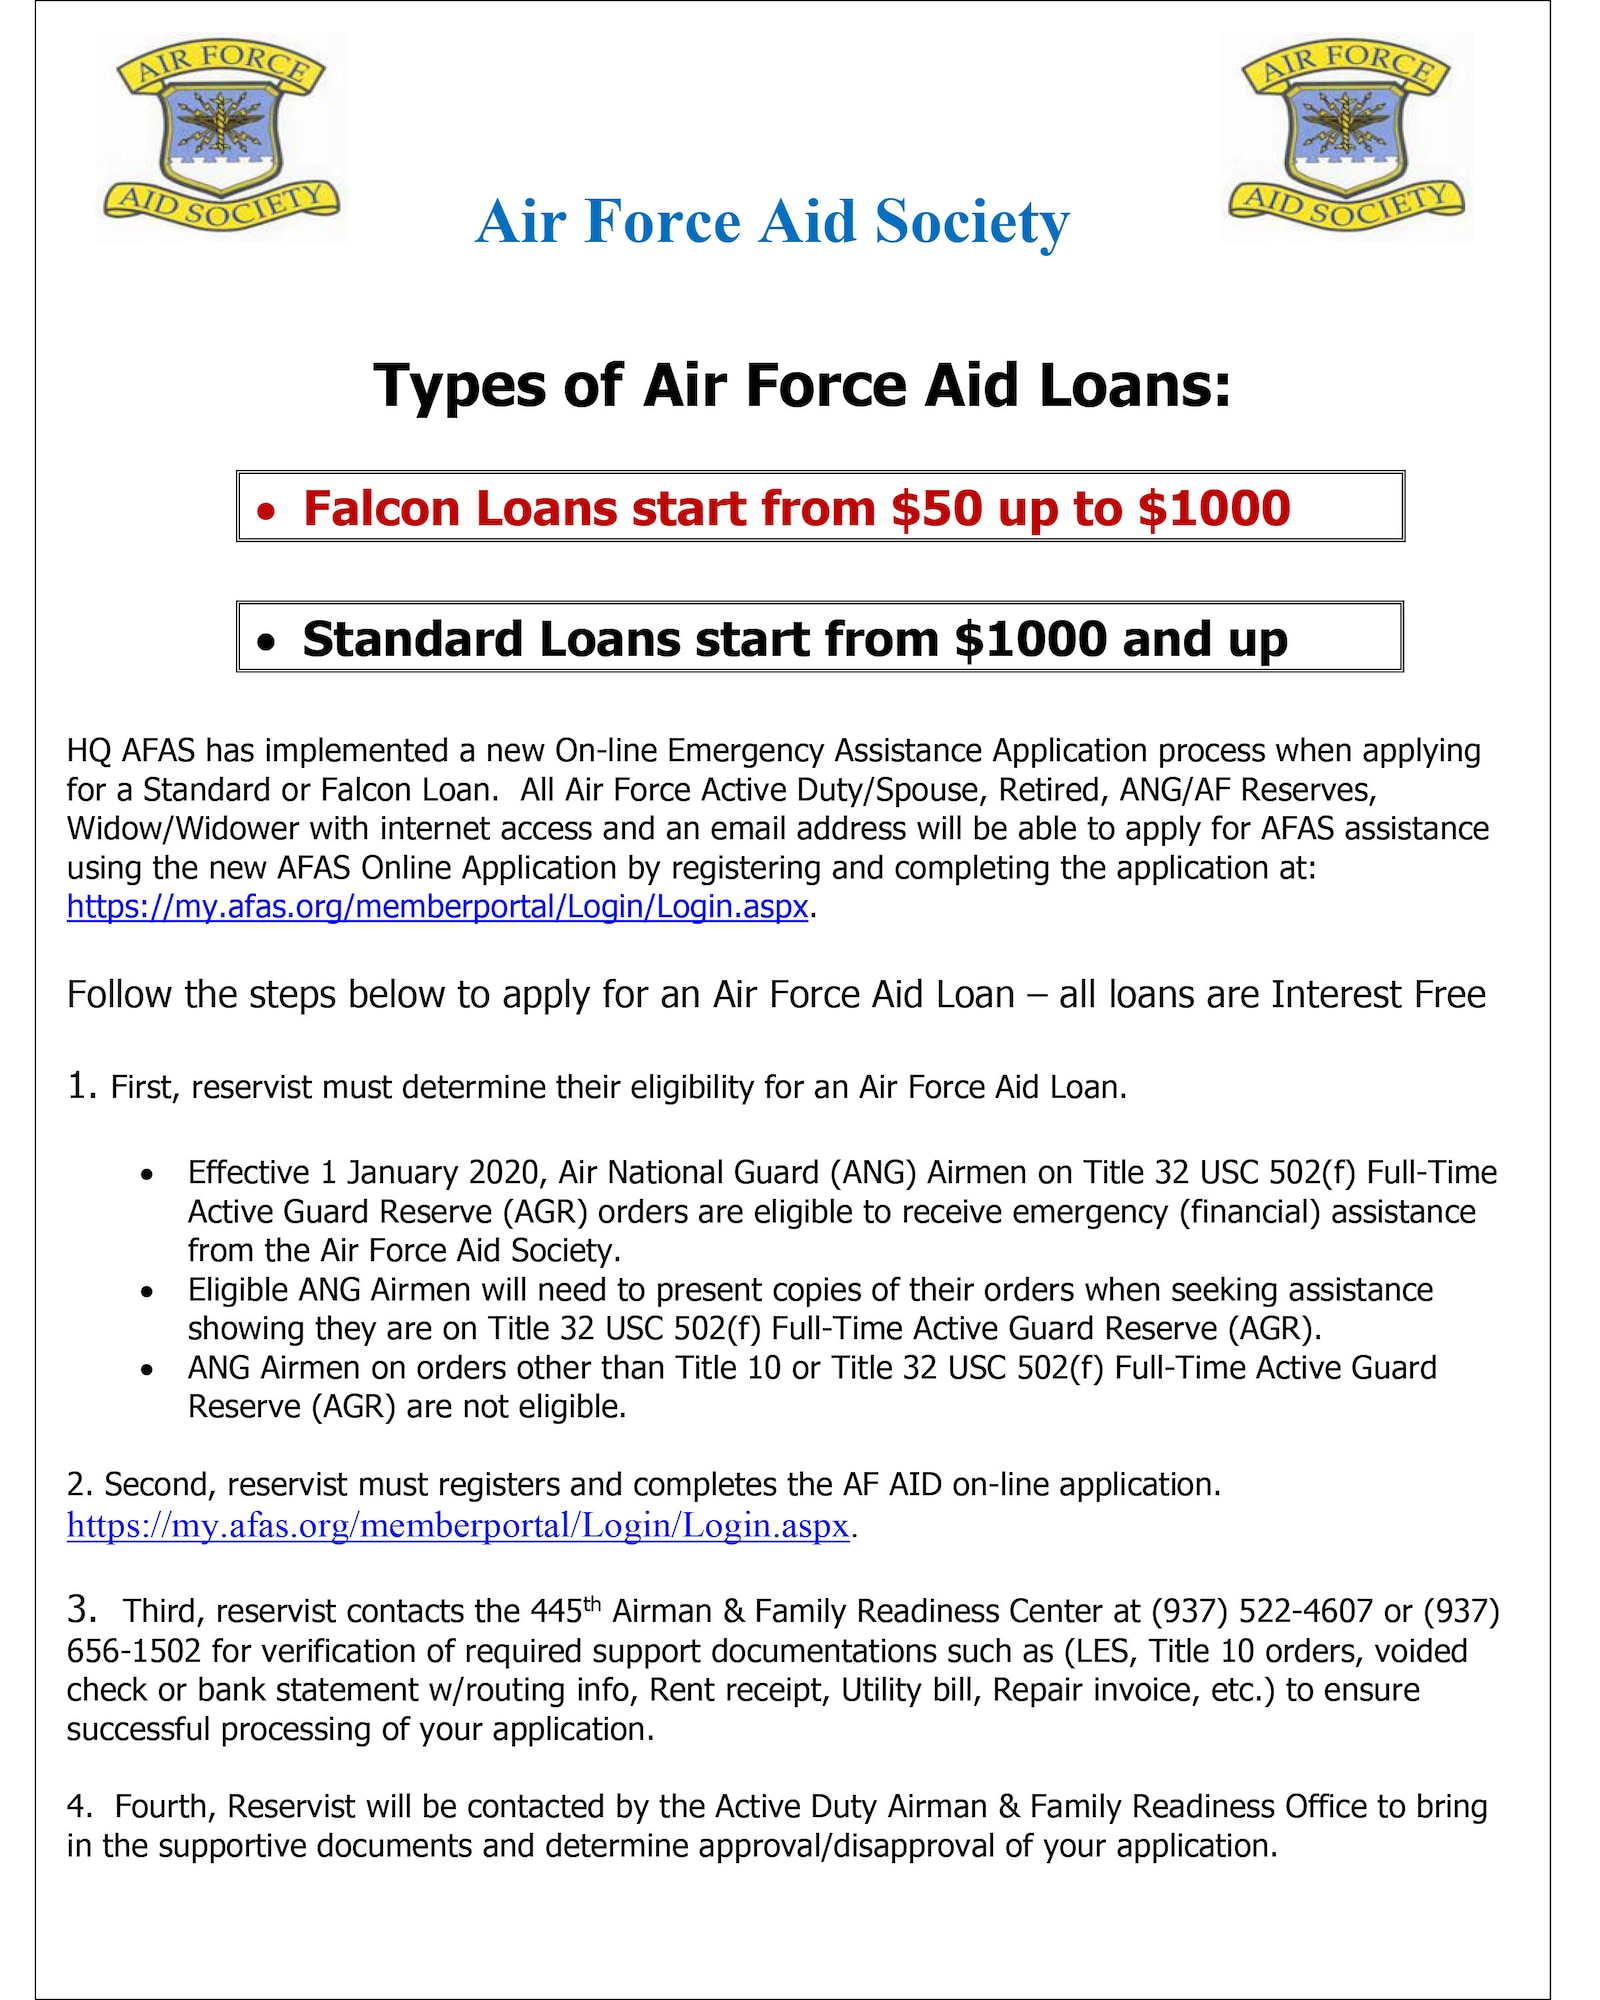 The 445th Airman and Family Readiness Center is there to help Reservists and their families. They have provided this information from the Air Force Aid Society.